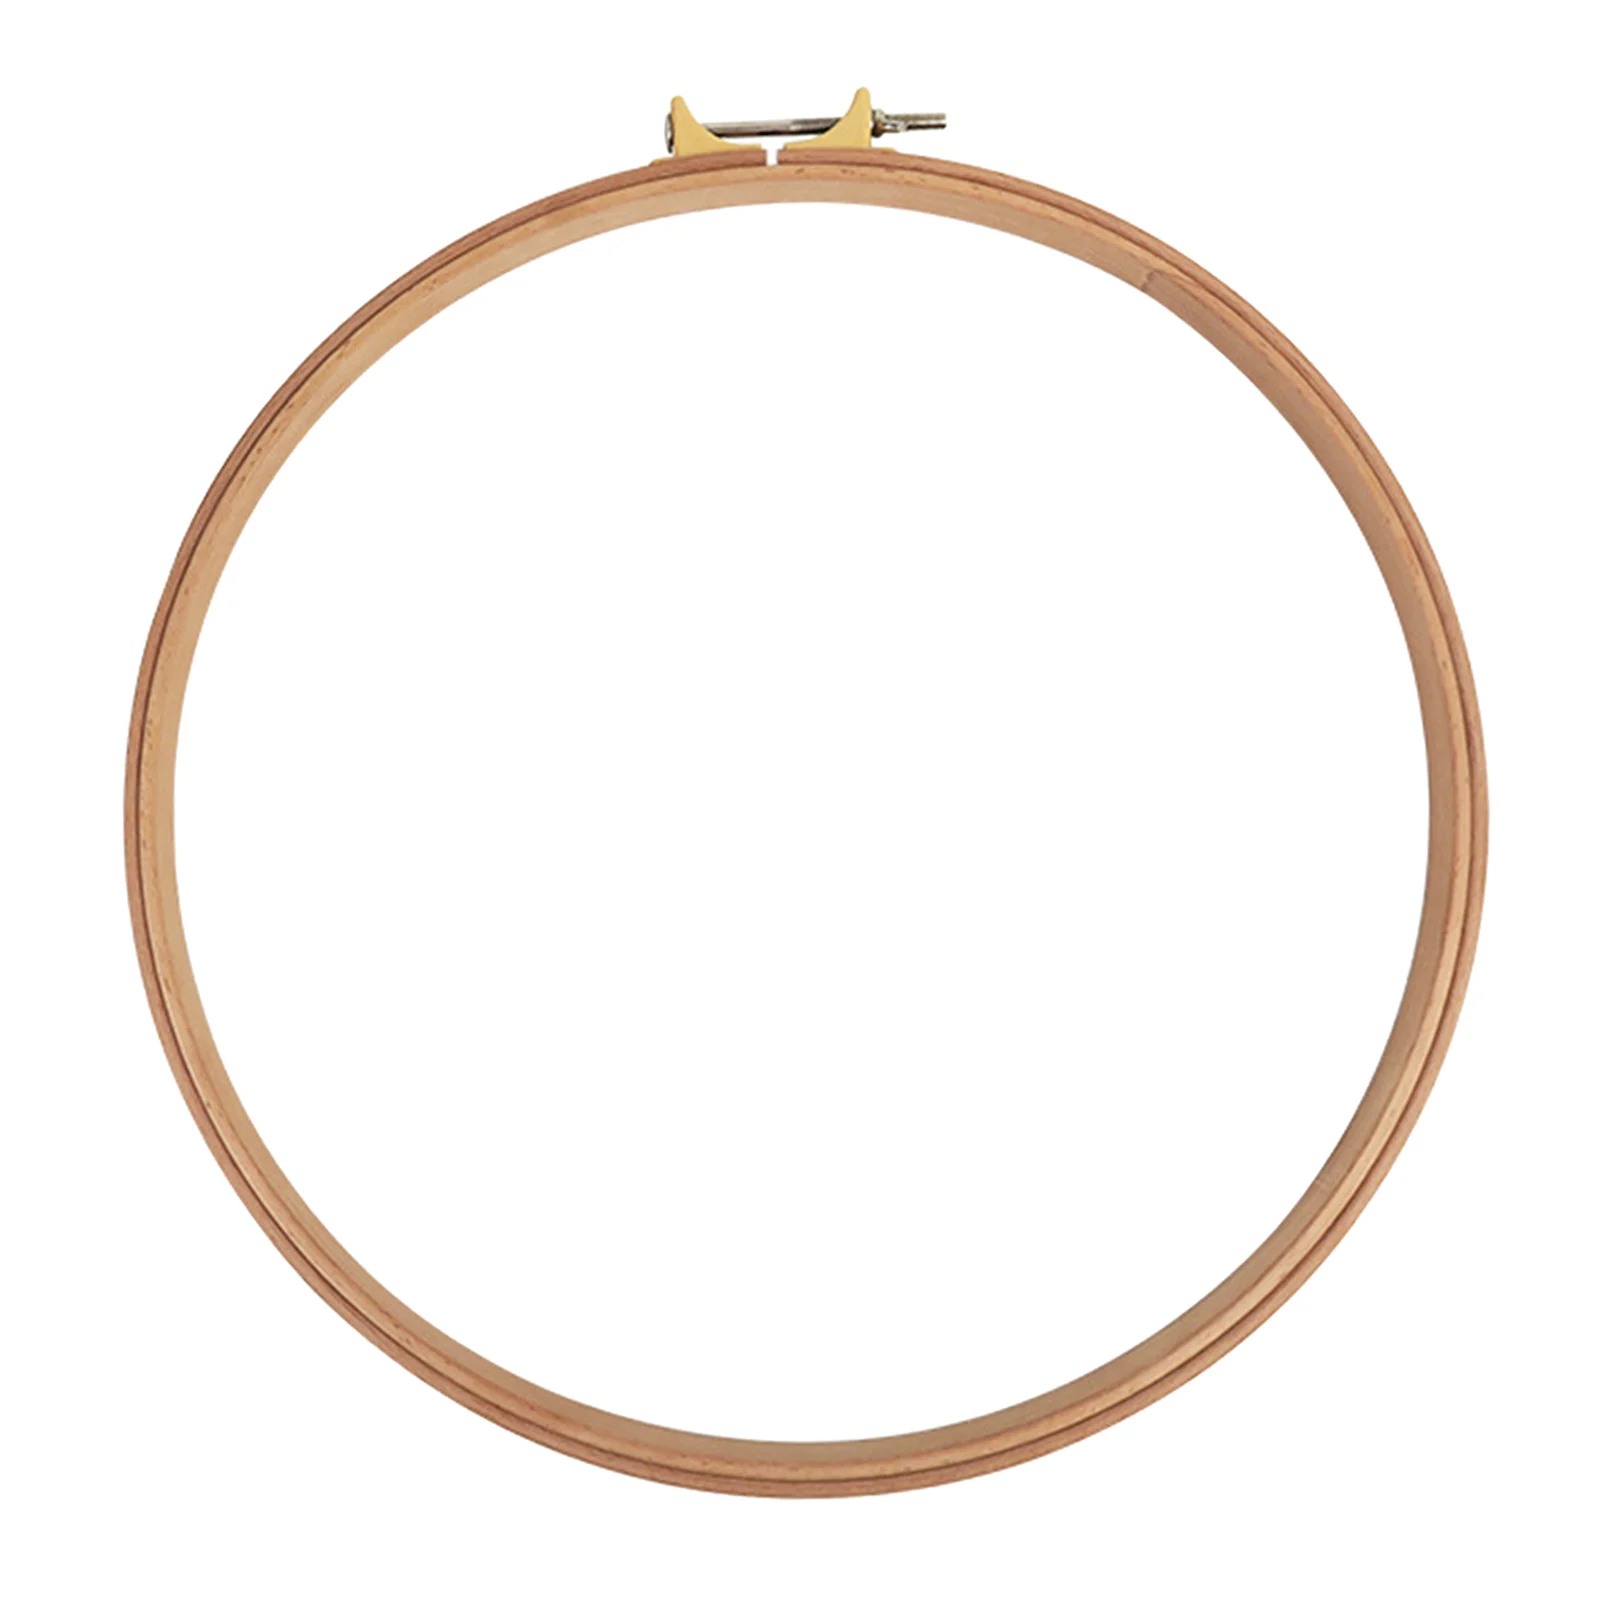 1 Piece set 14.5inch 37cm Wooden Embroidery Hoops Wooden Circle Cross Stitch Hoop DIY Household Handmade Sewing Tools